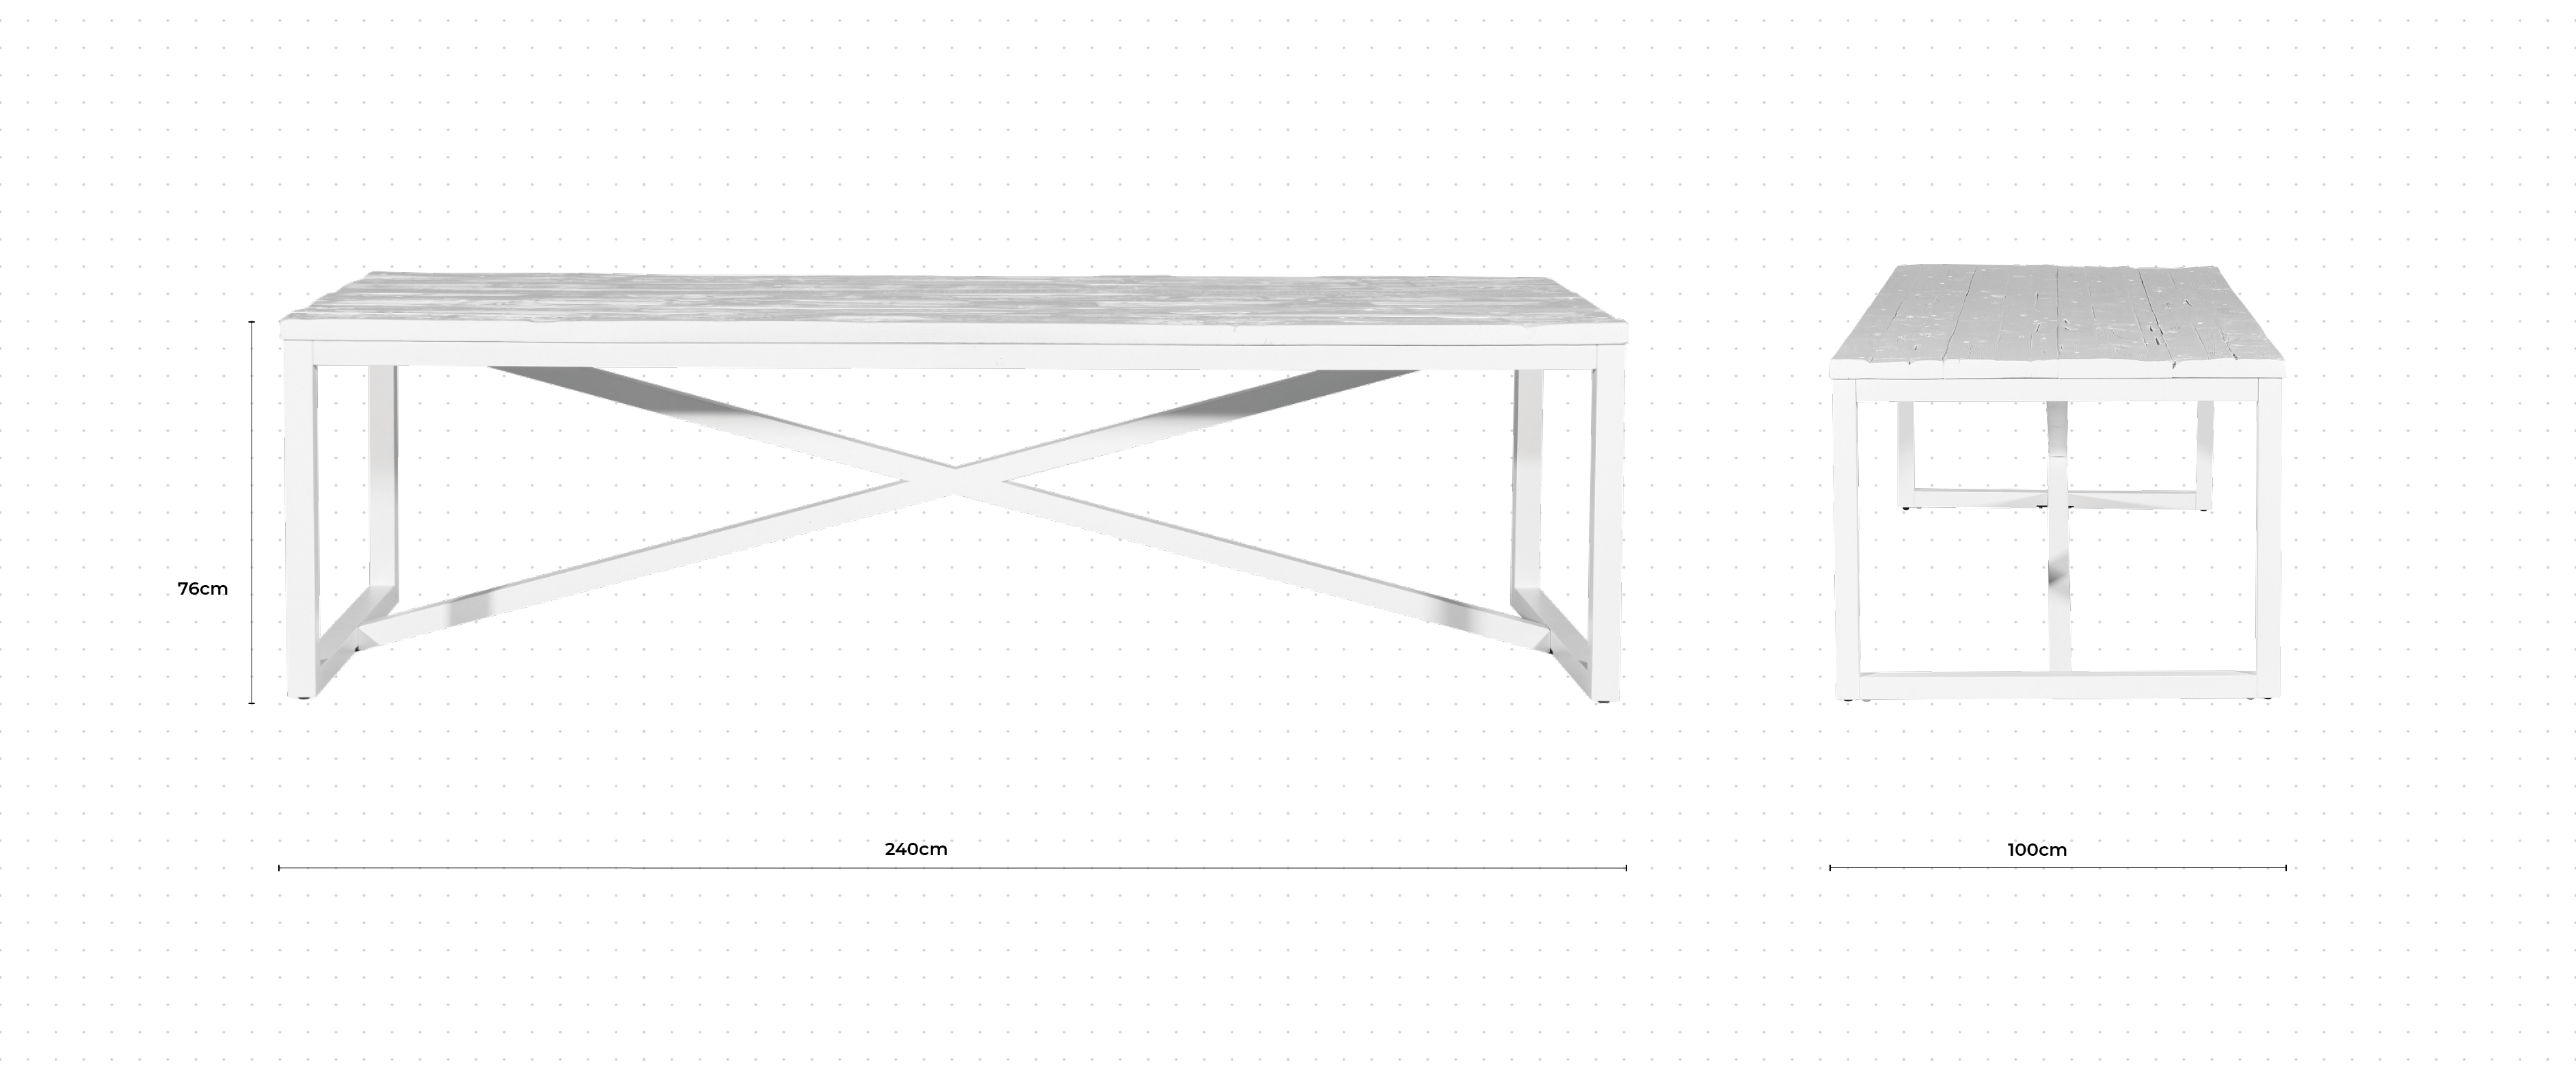 Minimal Dining Table dimensions